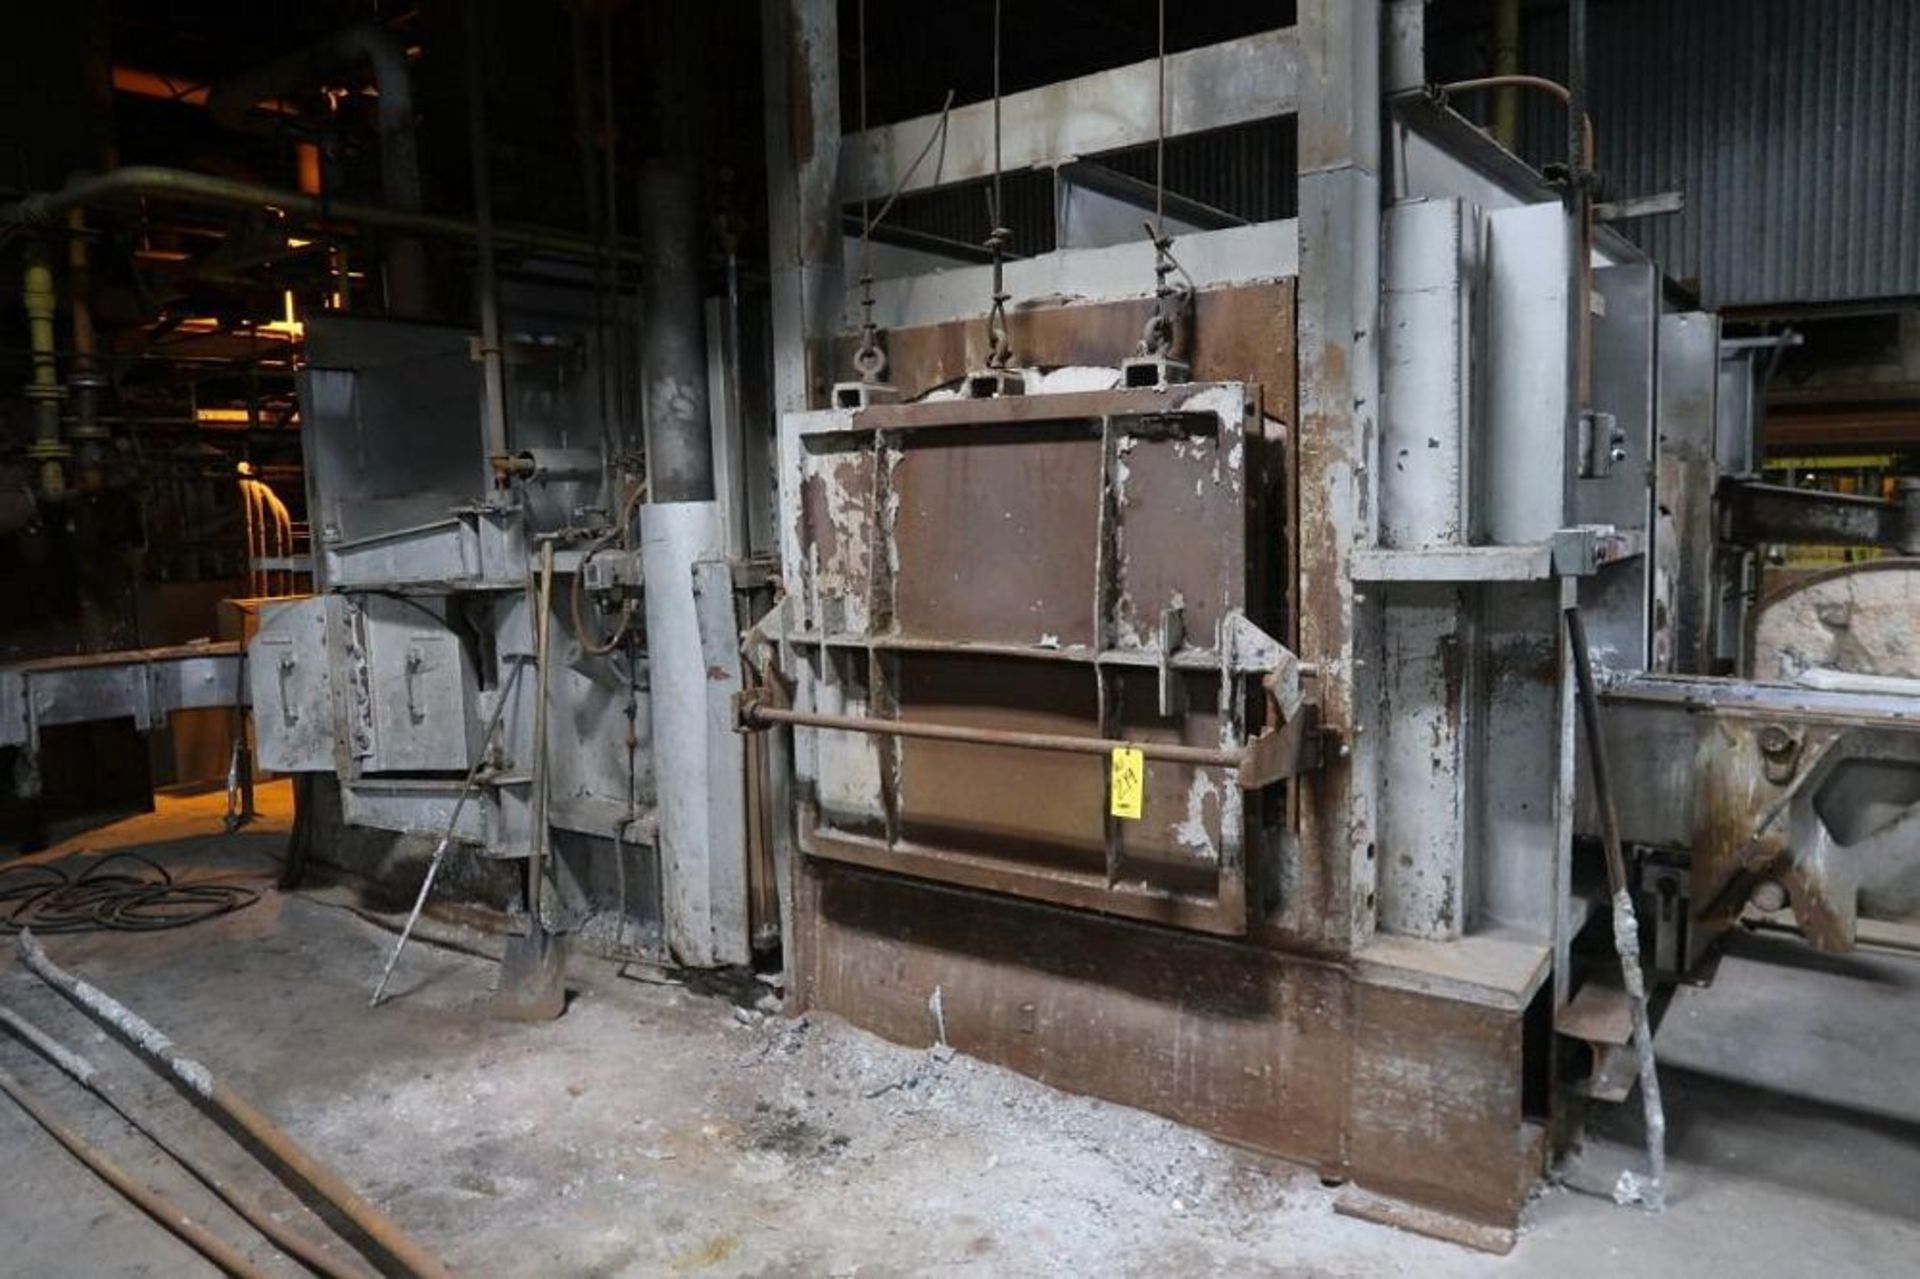 LOT: Hunter 80,000 lb. Gas/Oil Fired Reverberatory Furnace (1970), with Allen Bradley PanelView 550 - Image 3 of 4